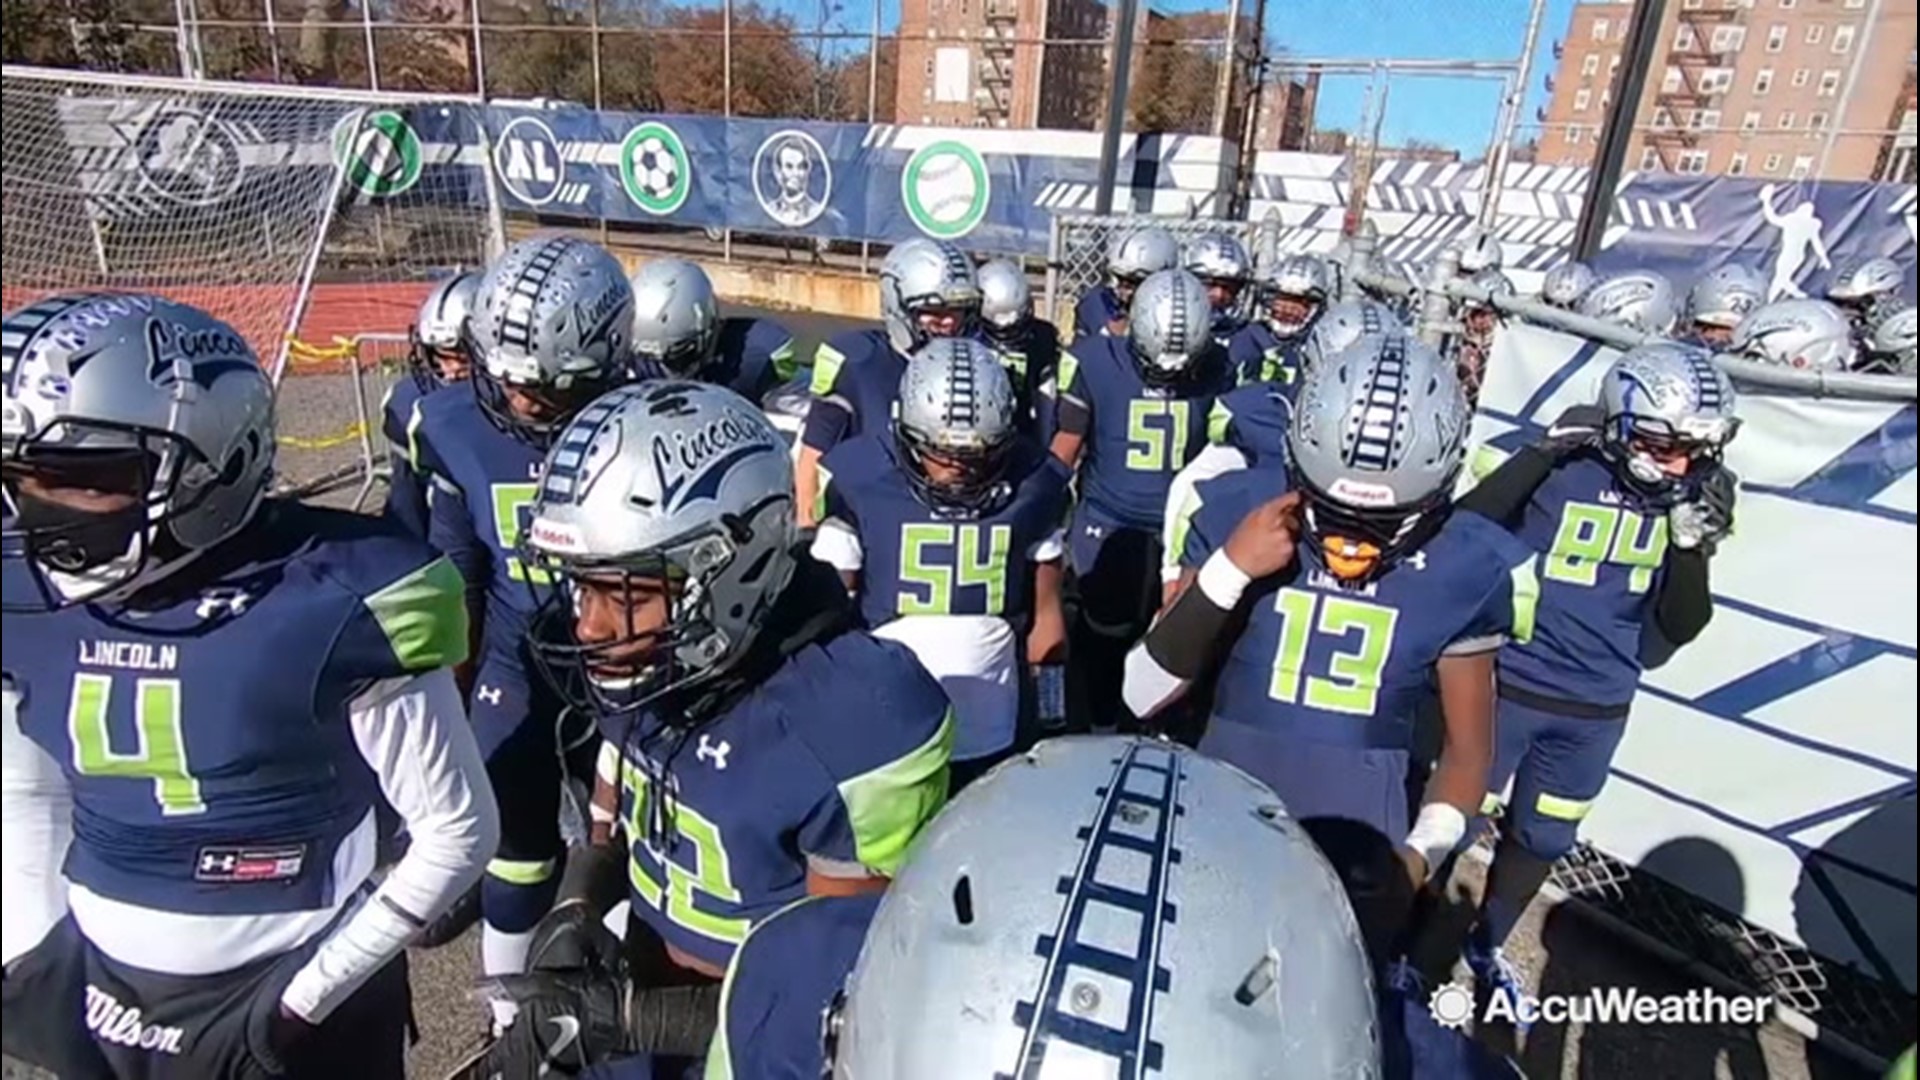 Accuweather's Dexter Henry checked out how the Abraham Lincoln Railsplitters football team is battling other teams and cold weather during a playoff run.